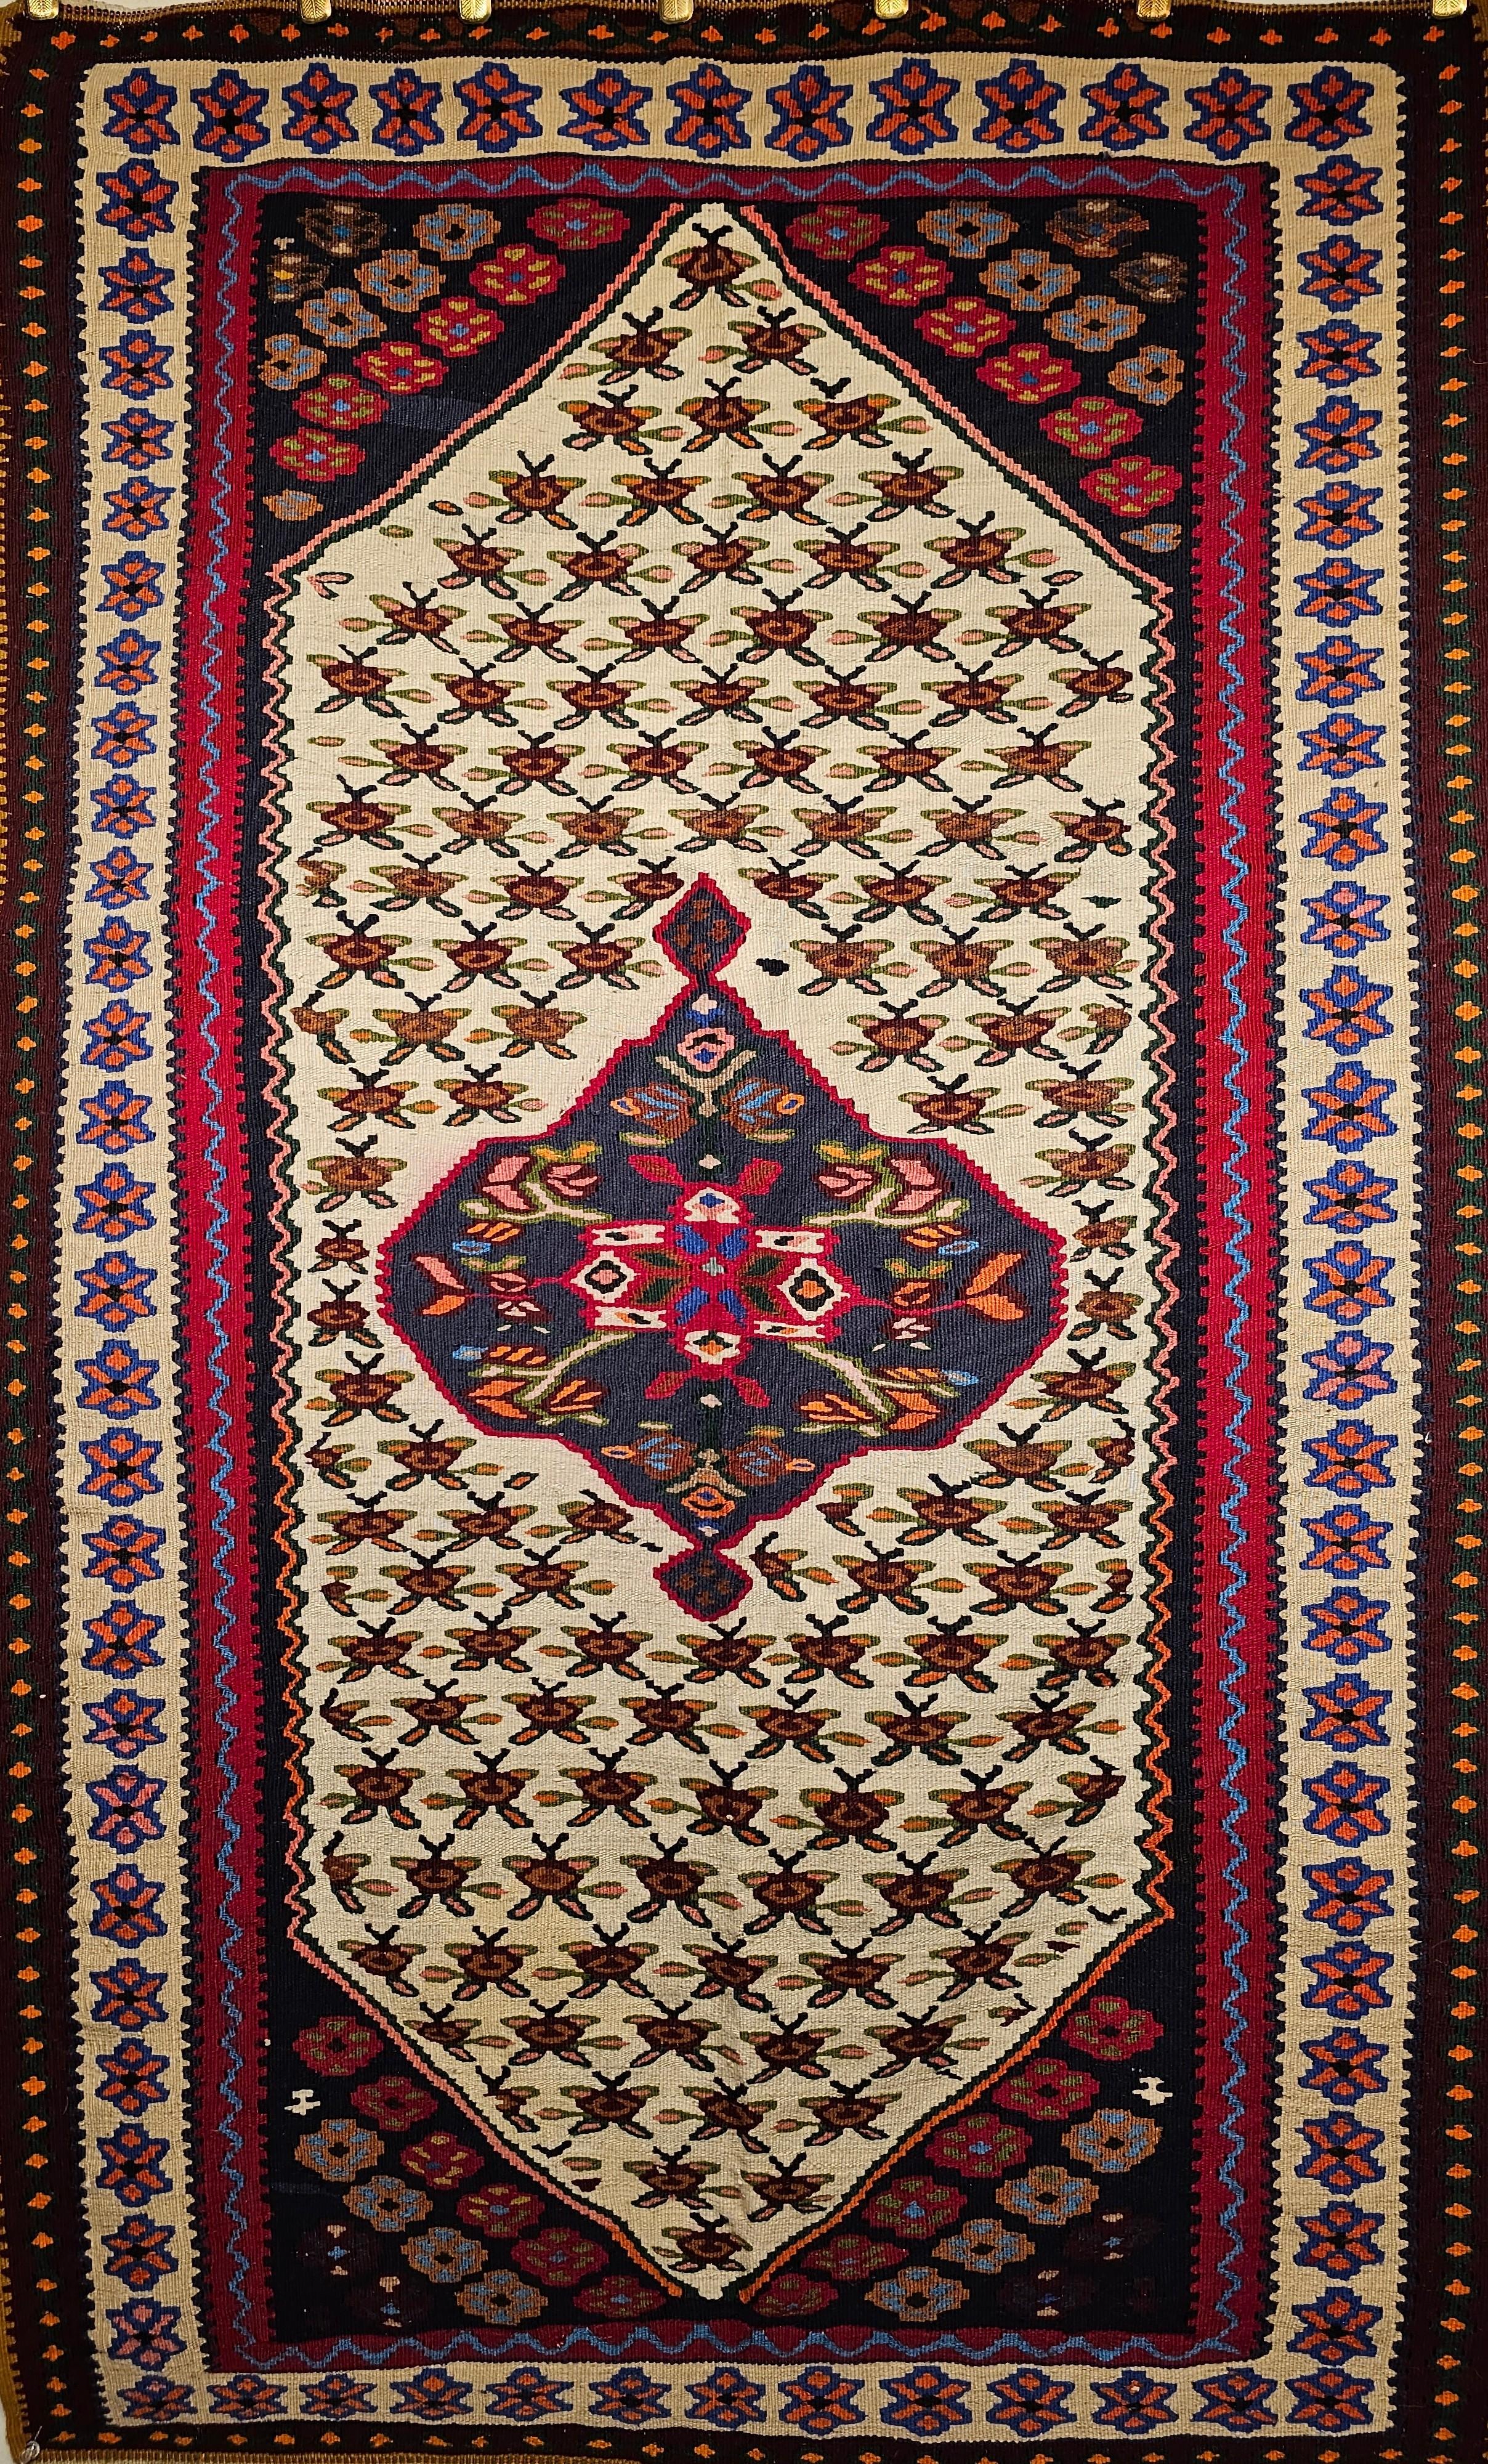 A beautiful vintage Persian Senneh (Bidjar) Kilim area rug from the Kurdistan region of Western Persia. The Senneh kilim comes with a central medallion that has a geometric design in dark blue with designs in red, cream, and yellow.  The medallion